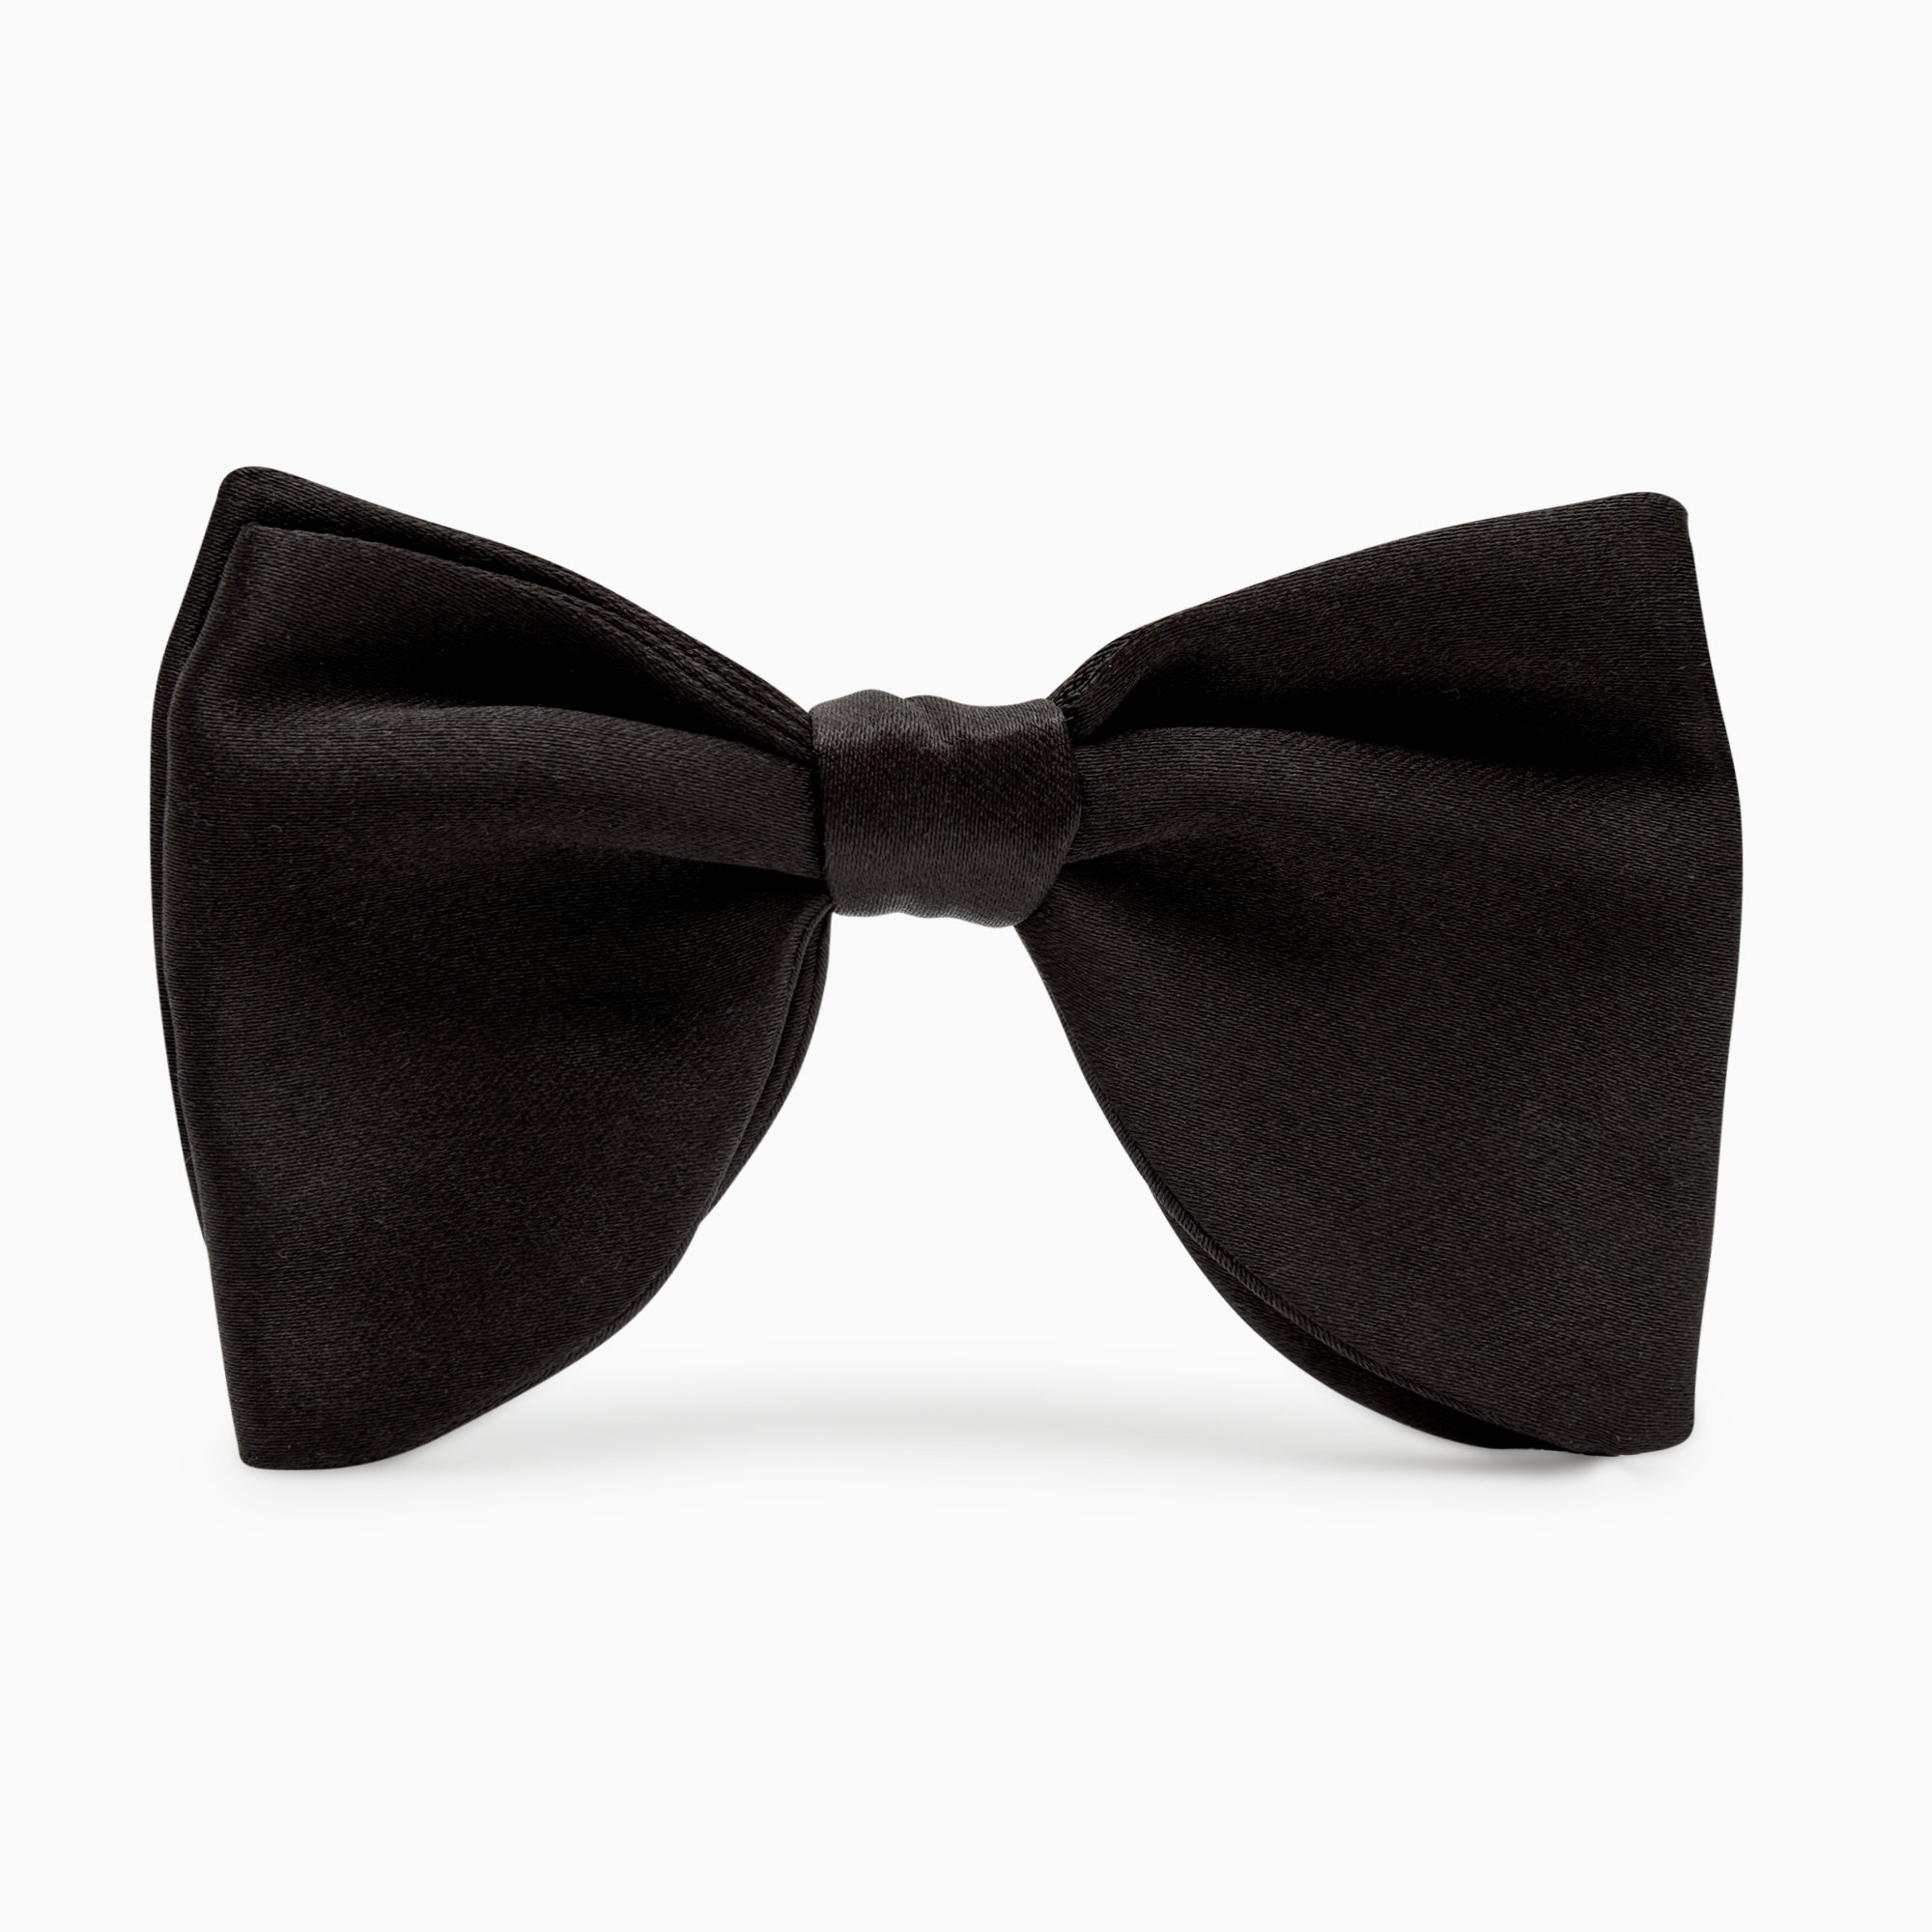 Silk Satin Bow Tie With Extended Tips - Black